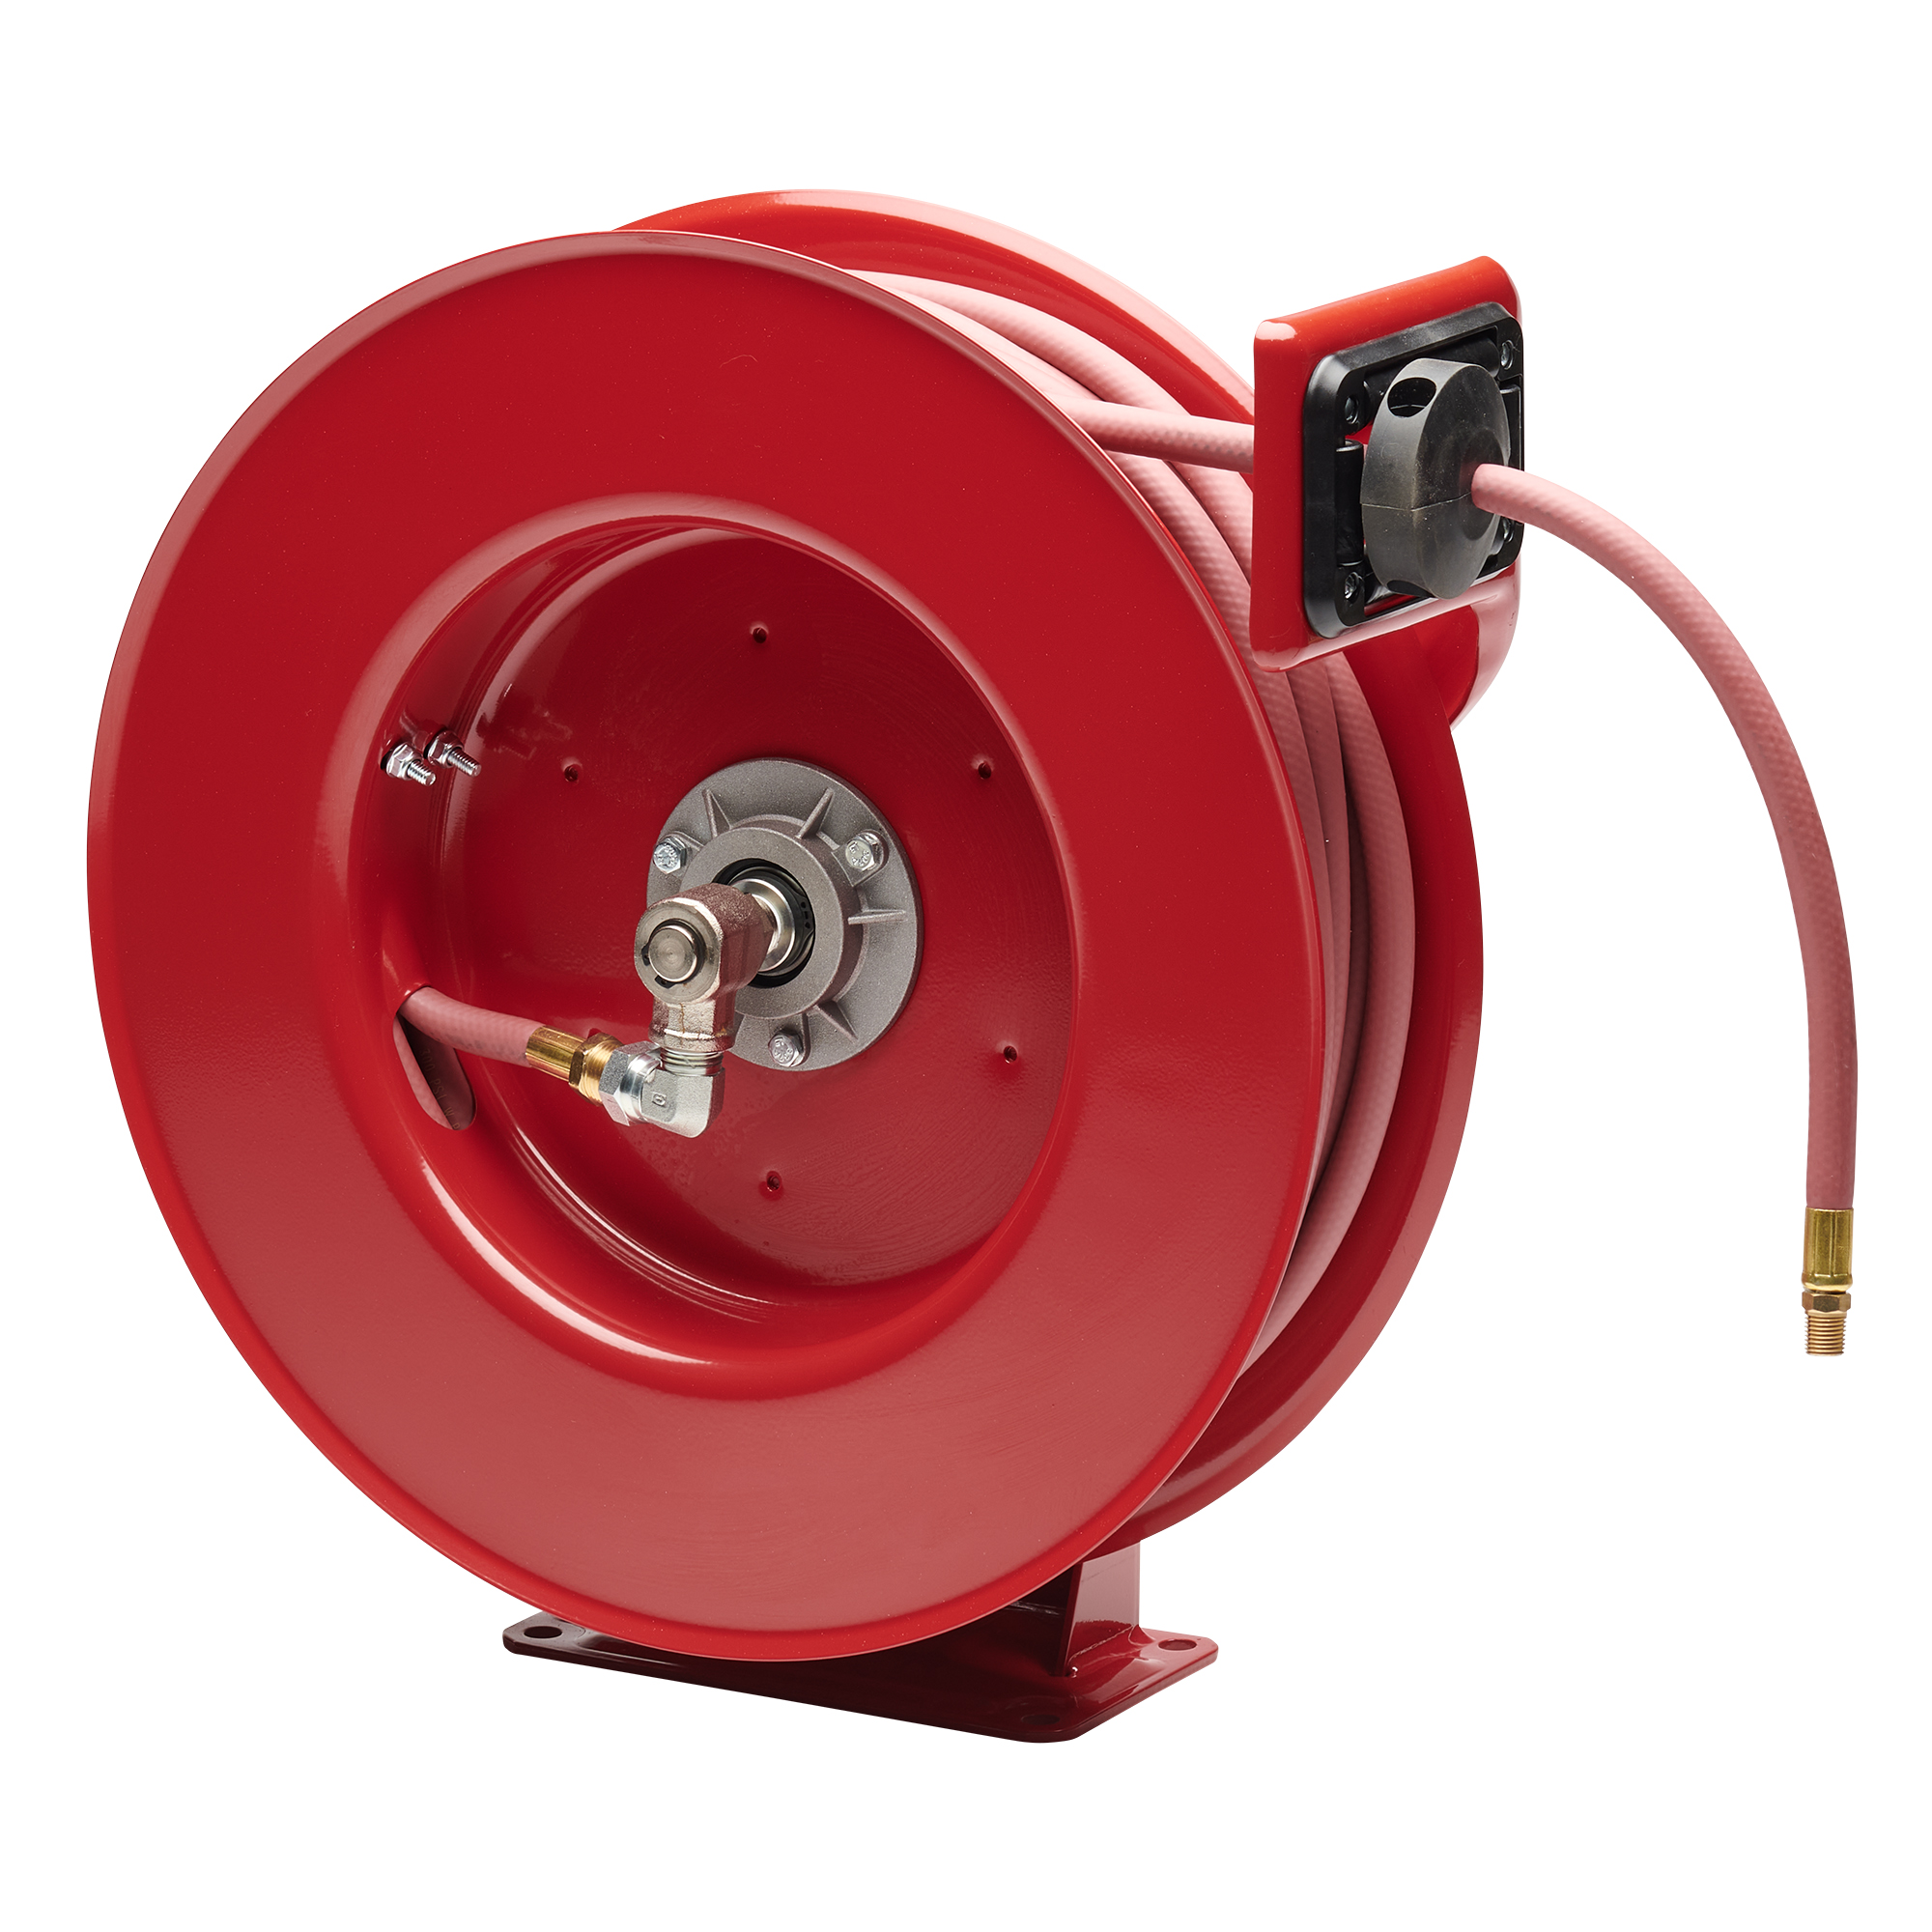 Koval Inc. 100 ft. long 3/8 Wall Mount Auto Retractable Air Hose Reel  (100FT, Red/Black)